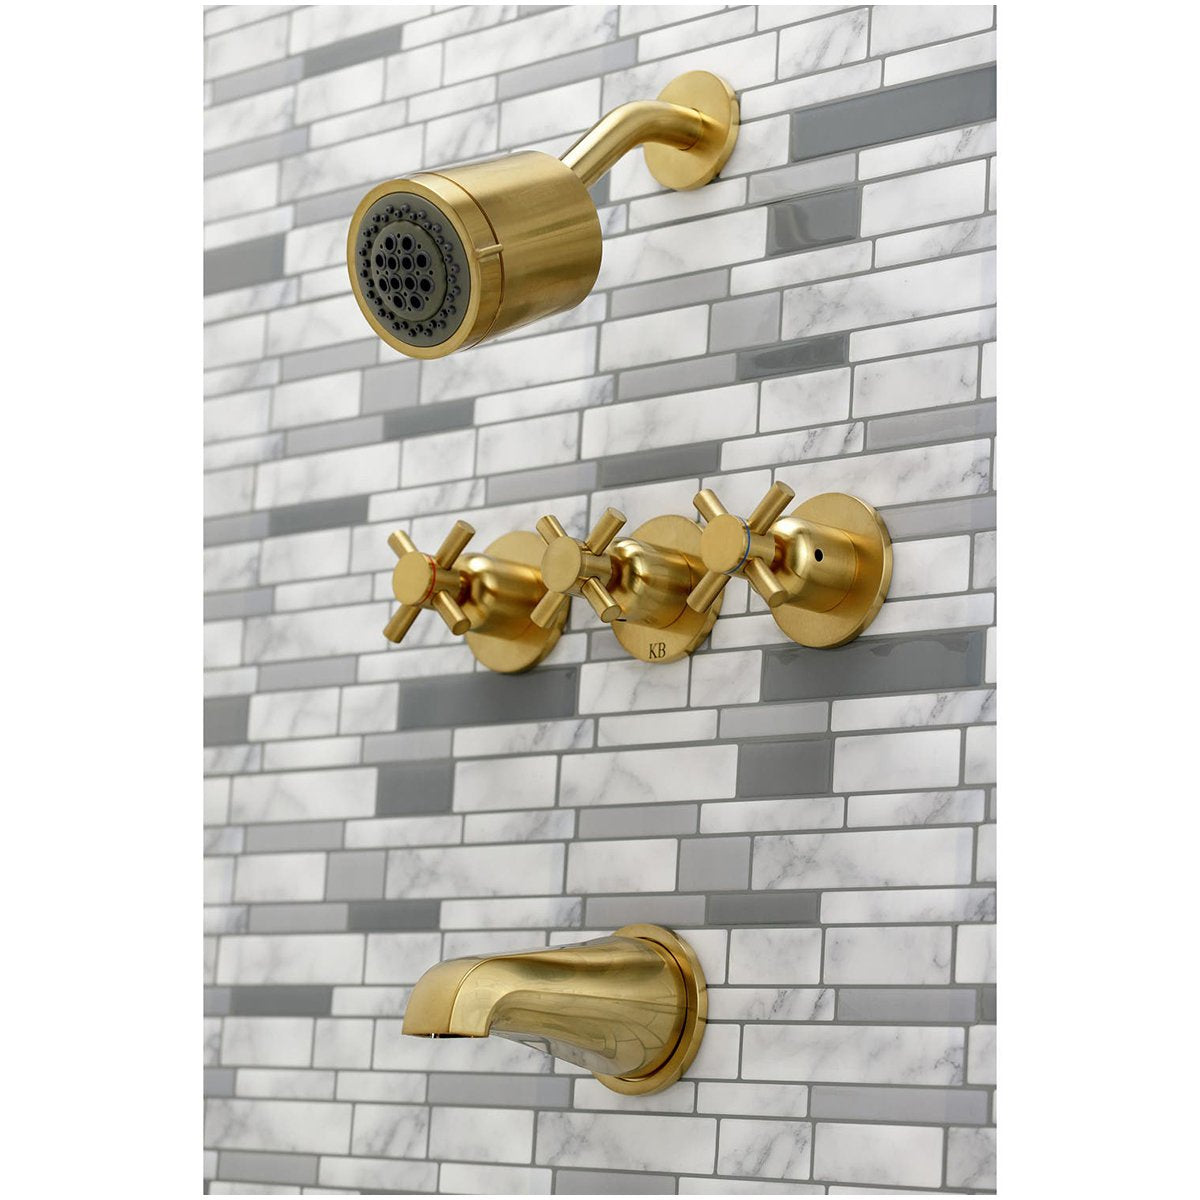 Kingston Brass Concord 7.13" x 10.56" Three-Handle Tub and Shower Faucet